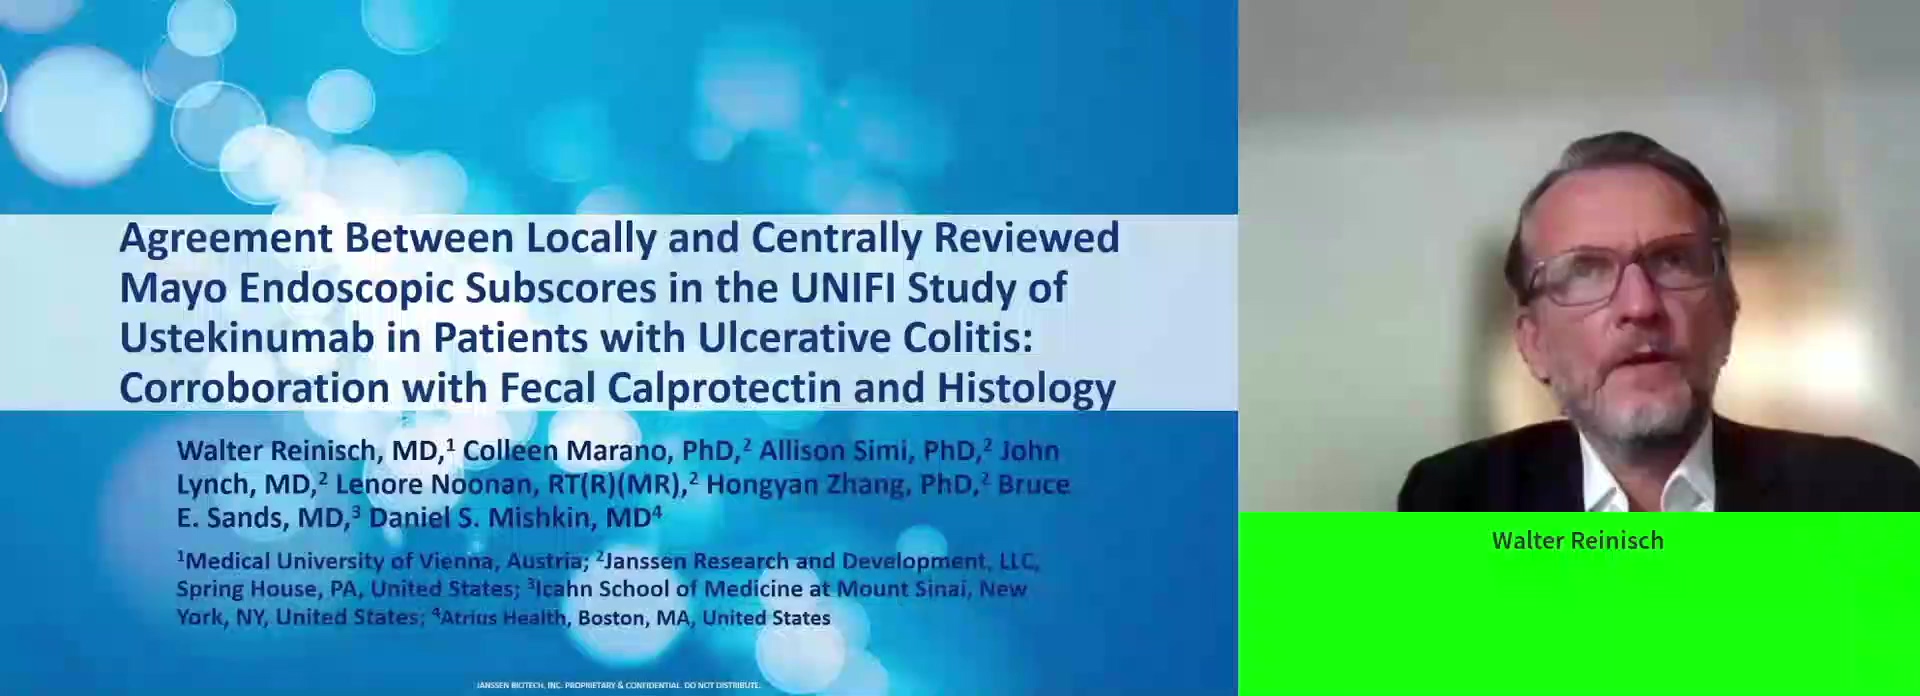 AGREEMENT BETWEEN LOCALLY AND CENTRALLY REVIEWED MAYO ENDOSCOPIC SUBSCORES IN THE UNIFI STUDY OF USTEKINUMAB IN PATIENTS WITH ULCERATIVE COLITIS: CORROBORATION WITH FECAL CALPROTECTIN AND HISTOLOGY